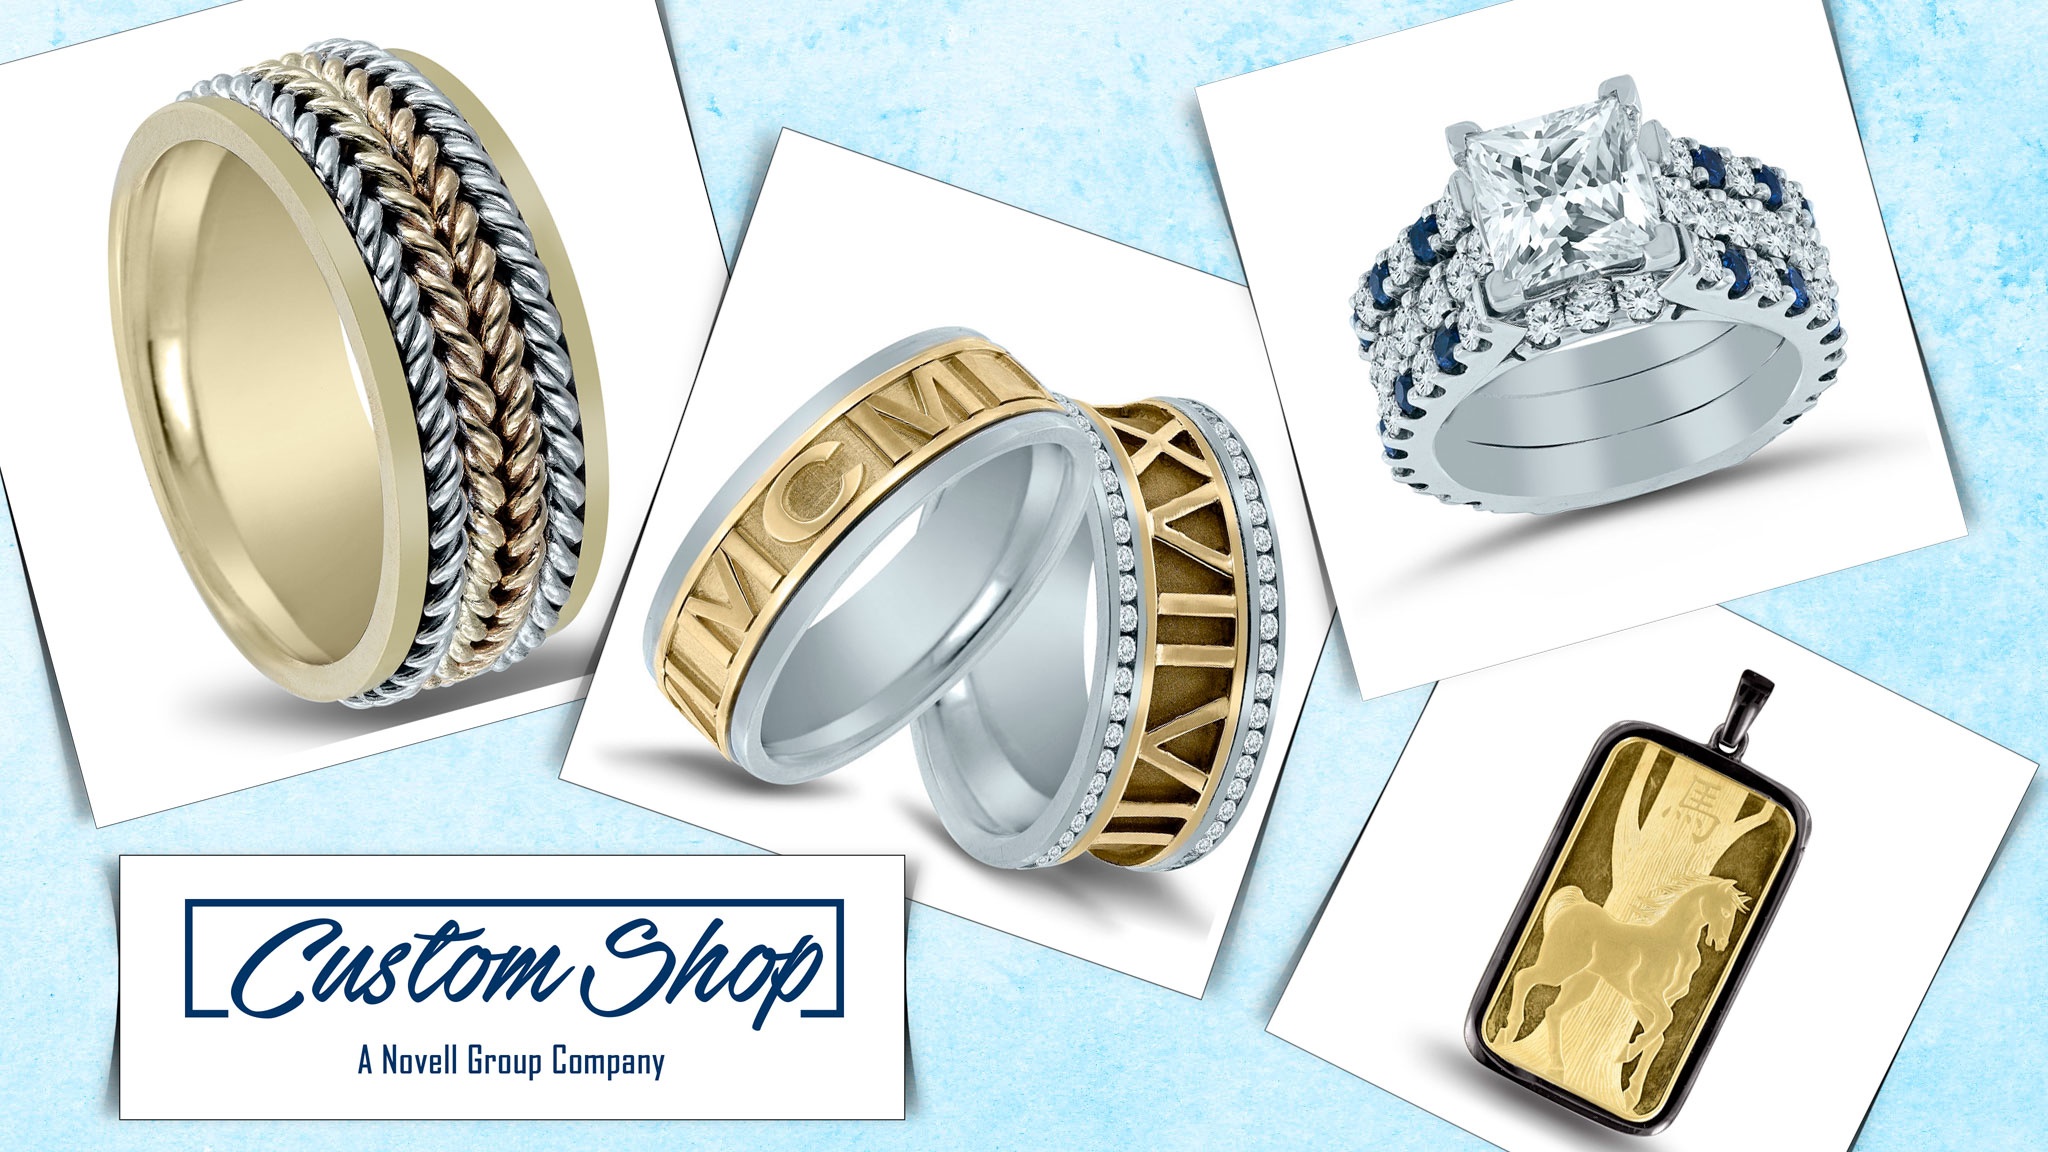 redesign your wedding band with Custom Shop